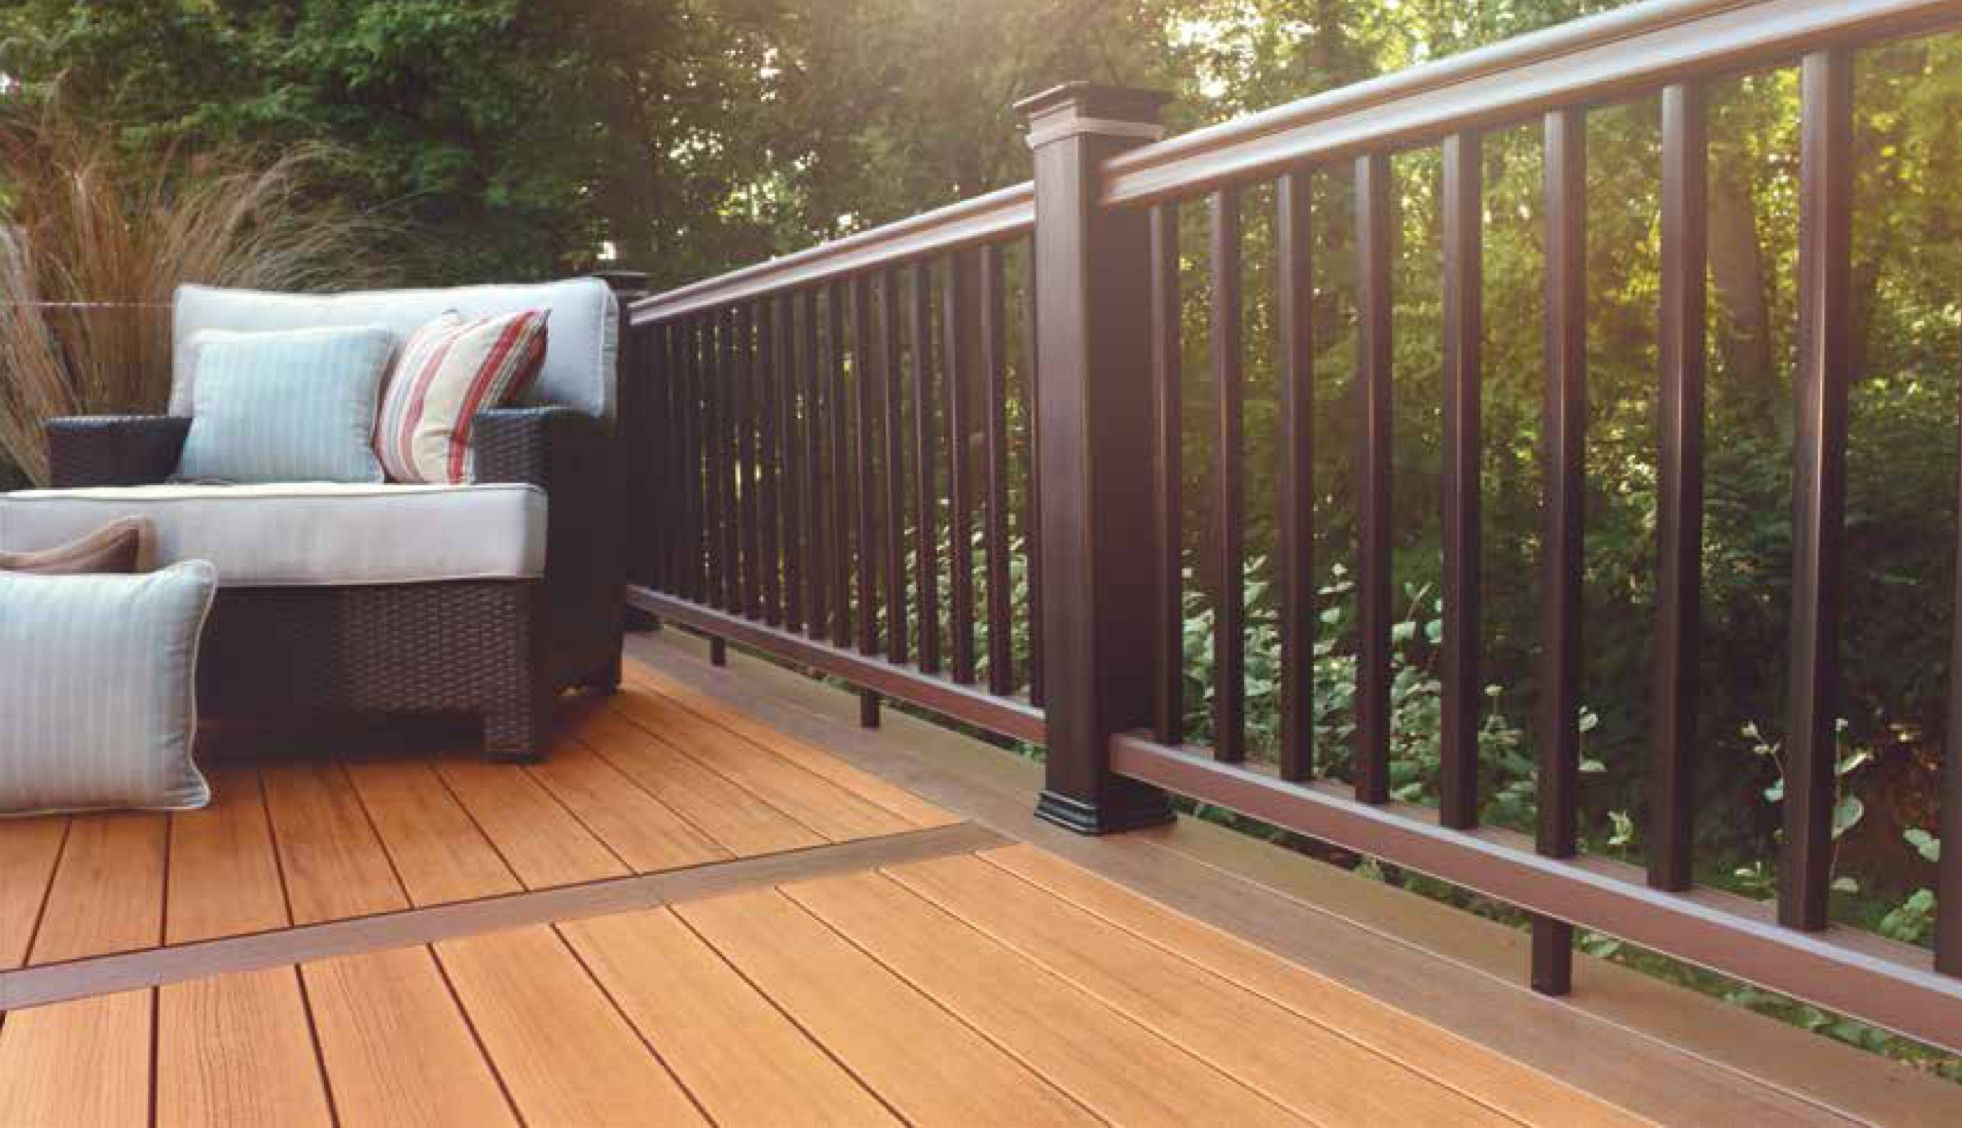 Timbertech Tropical Decking Collection In Teak Design The Deck Of intended for measurements 1962 X 1128